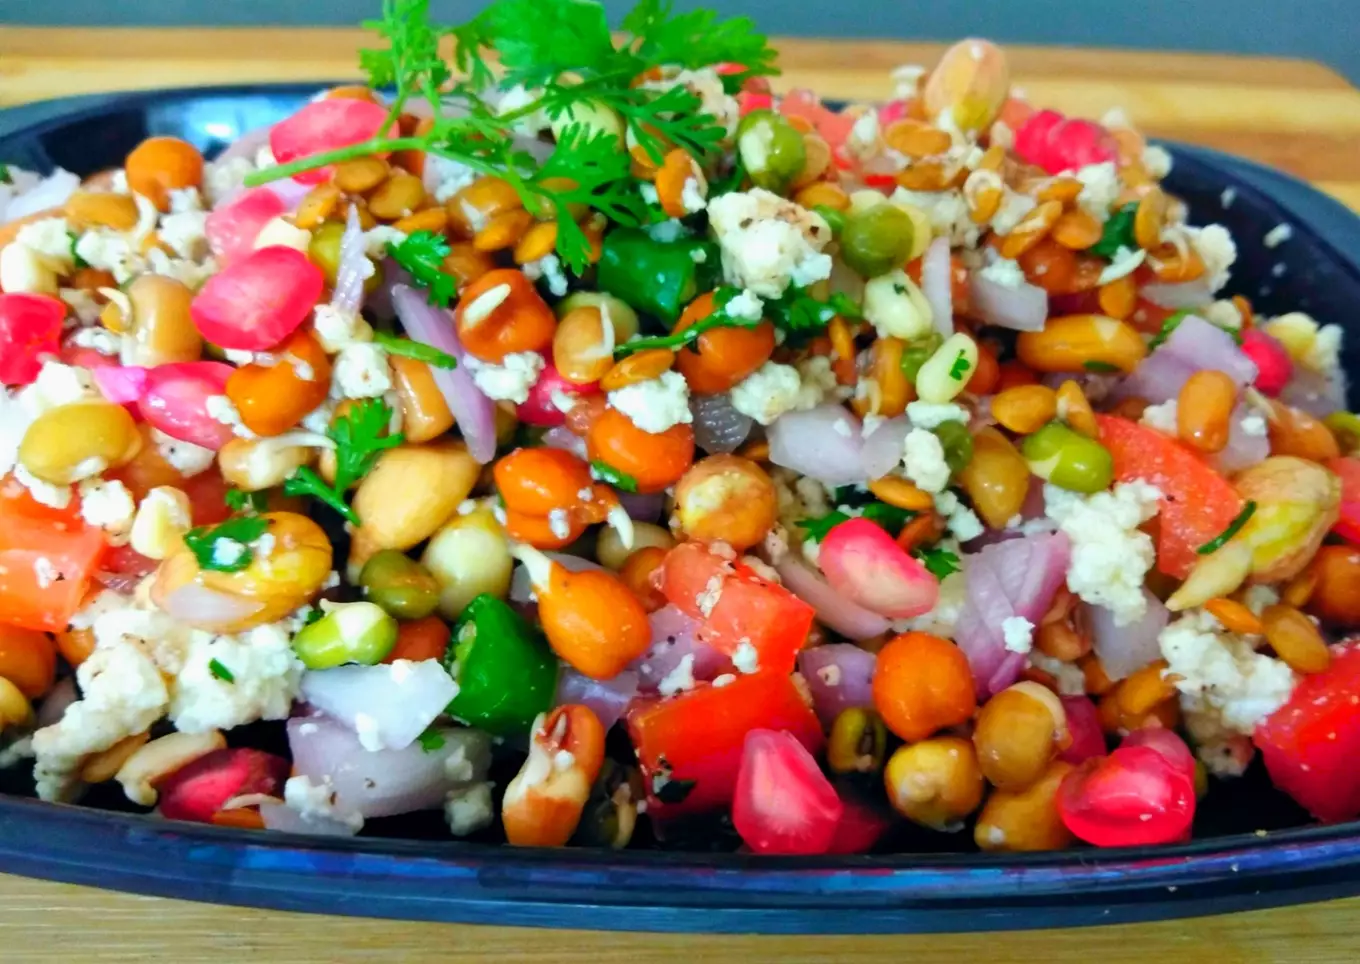 Mixed Sprouts Chaat